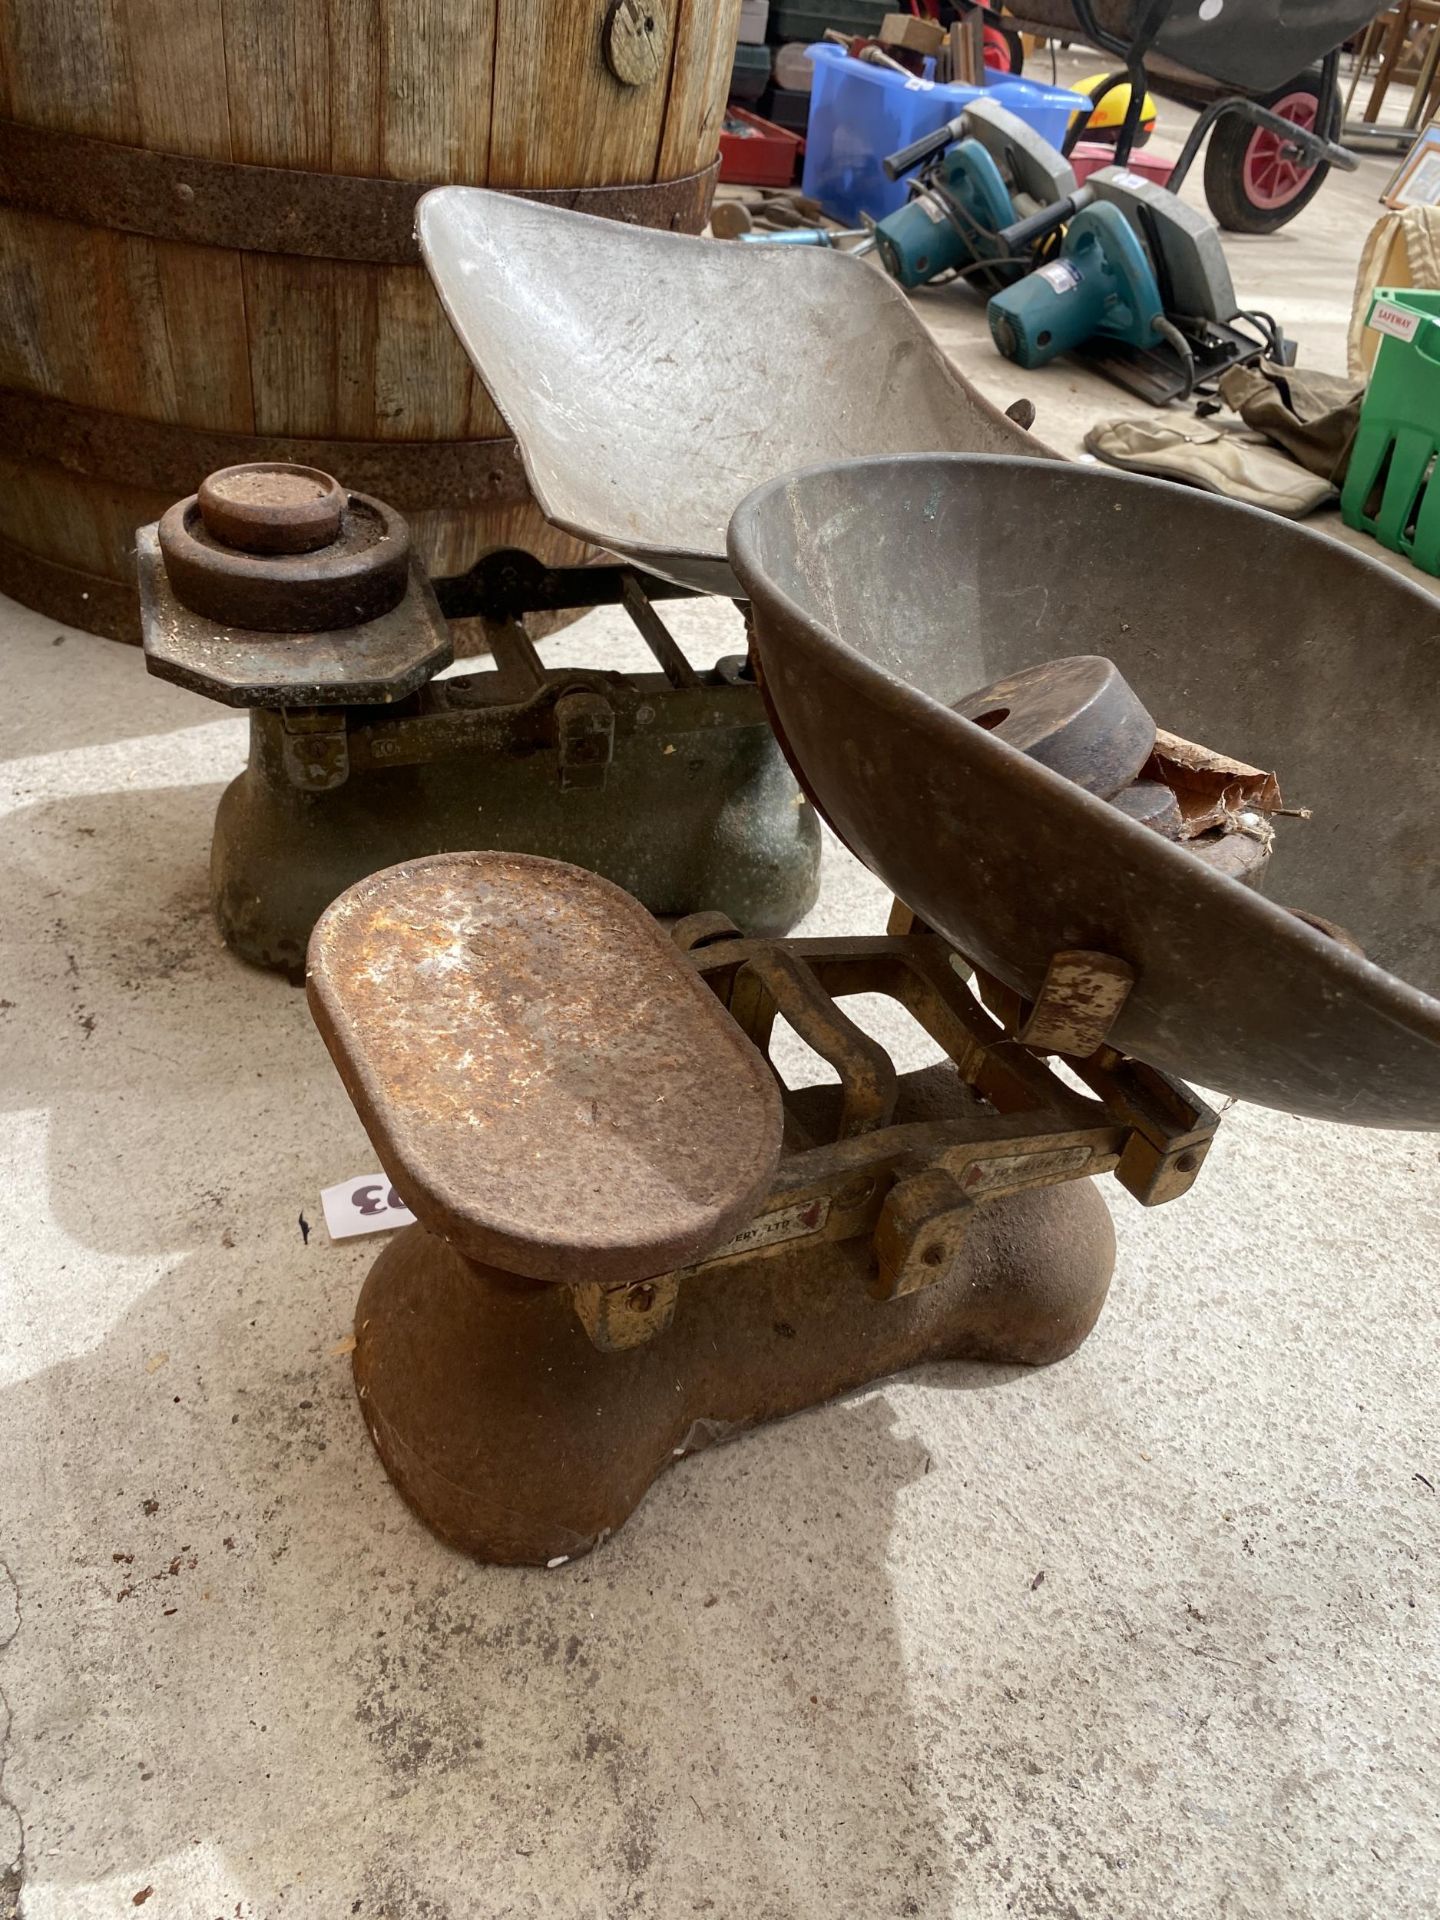 TWO SETS OF VINTAGE WEIGHING SCALES - Image 3 of 3